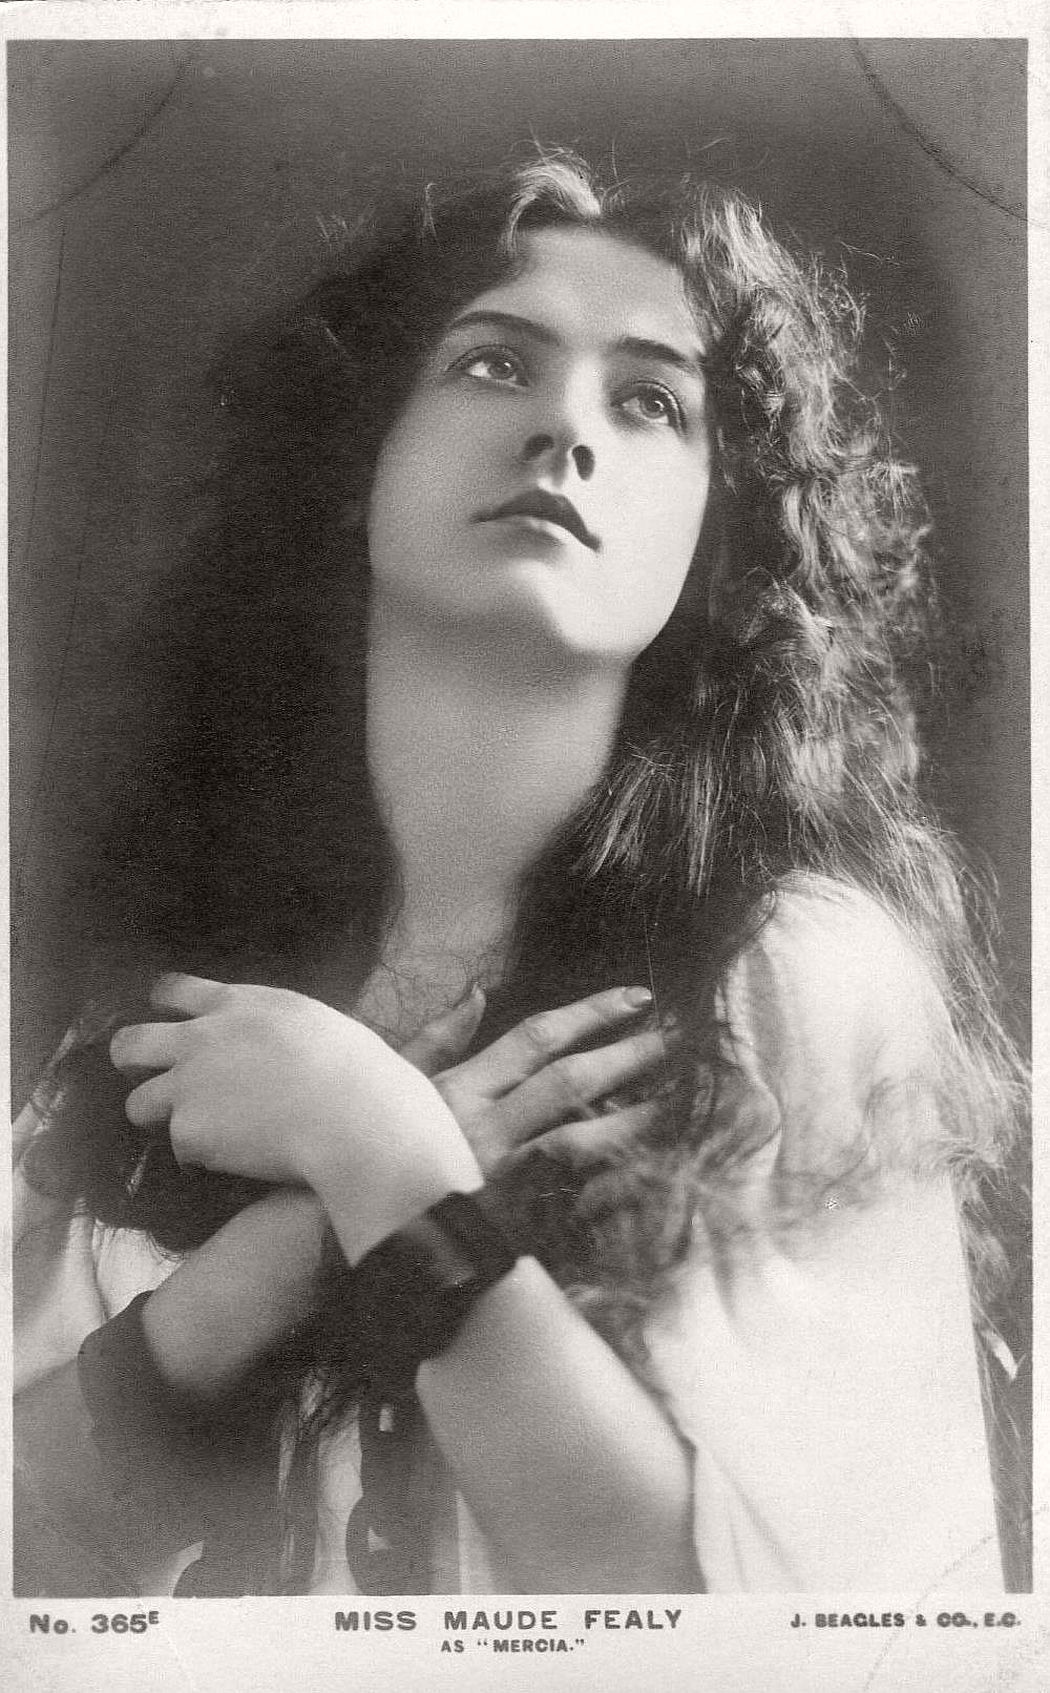 vintage-postcard-of-actress-miss-maude-fealy-1900s-early-xx-century-37